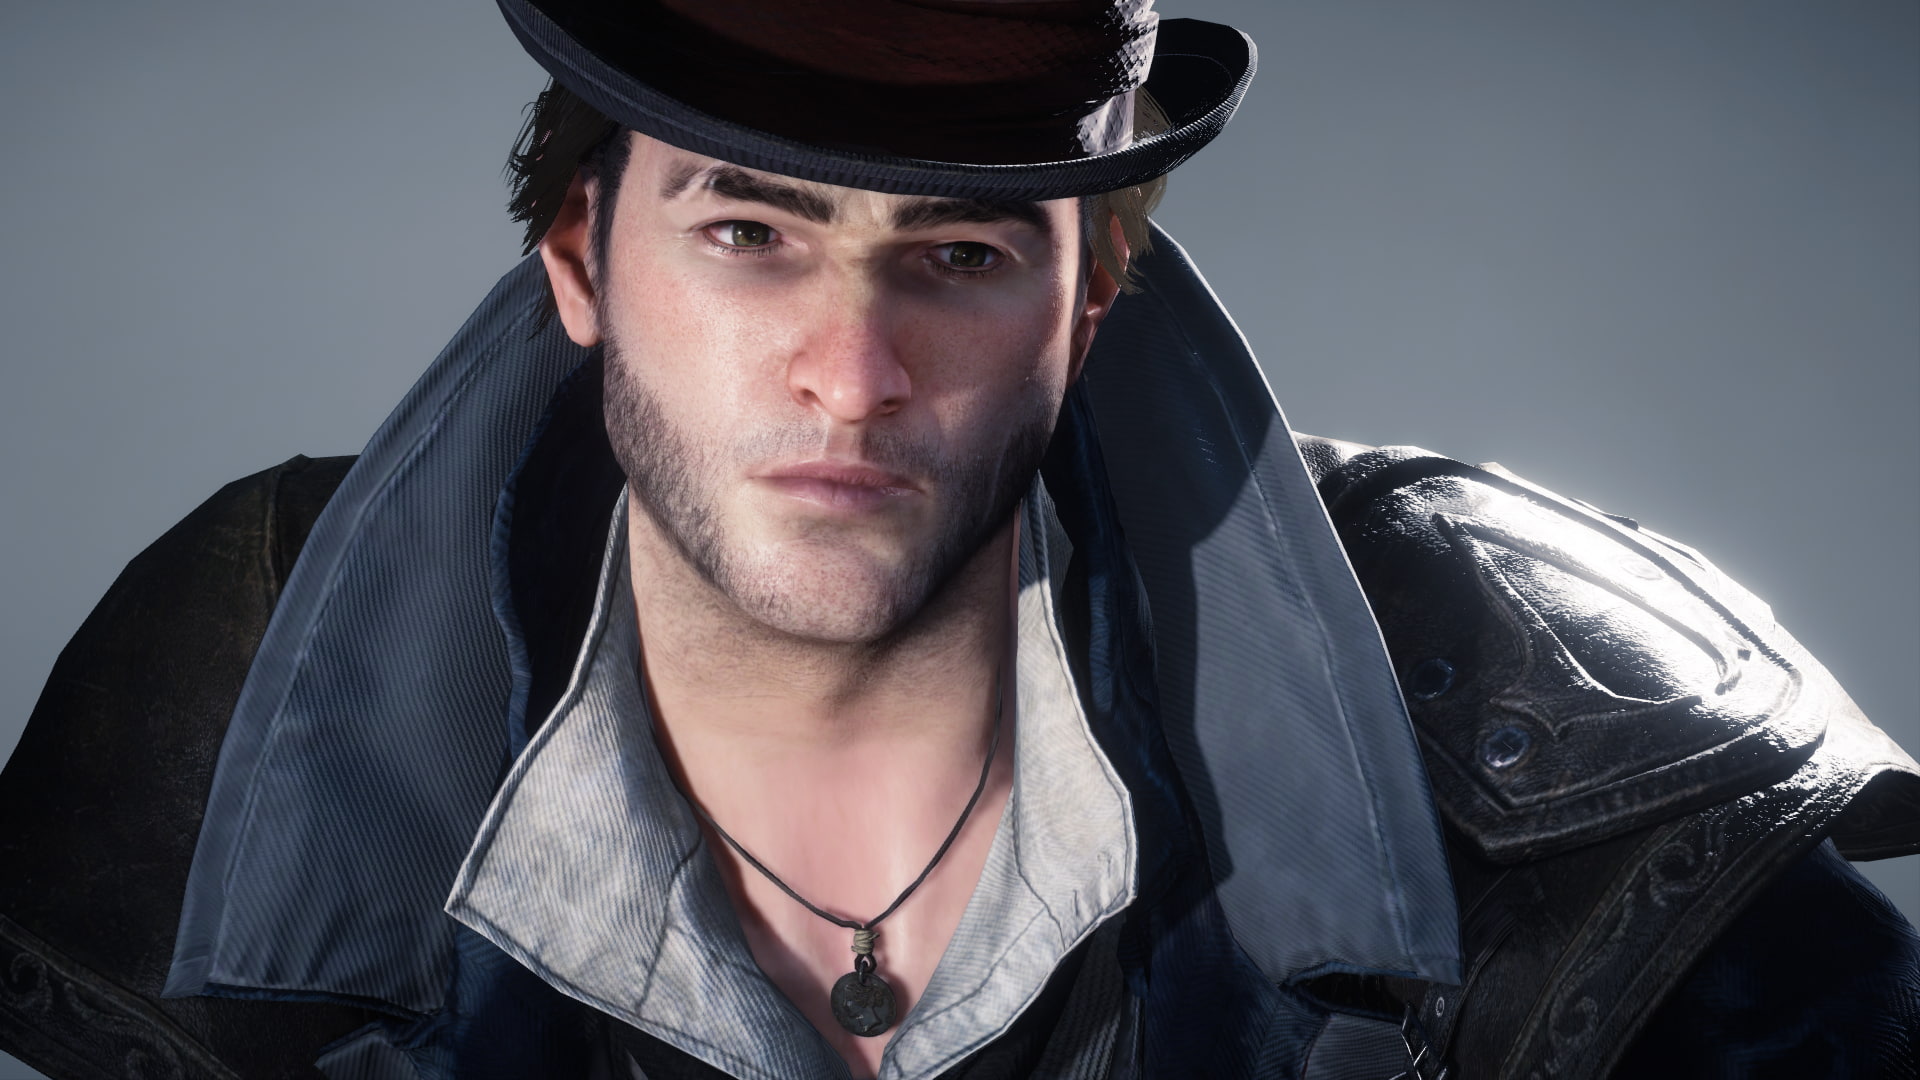 Assassin's Creed, Jacob Frye, Syndicate, Assassin's Creed Syndicate